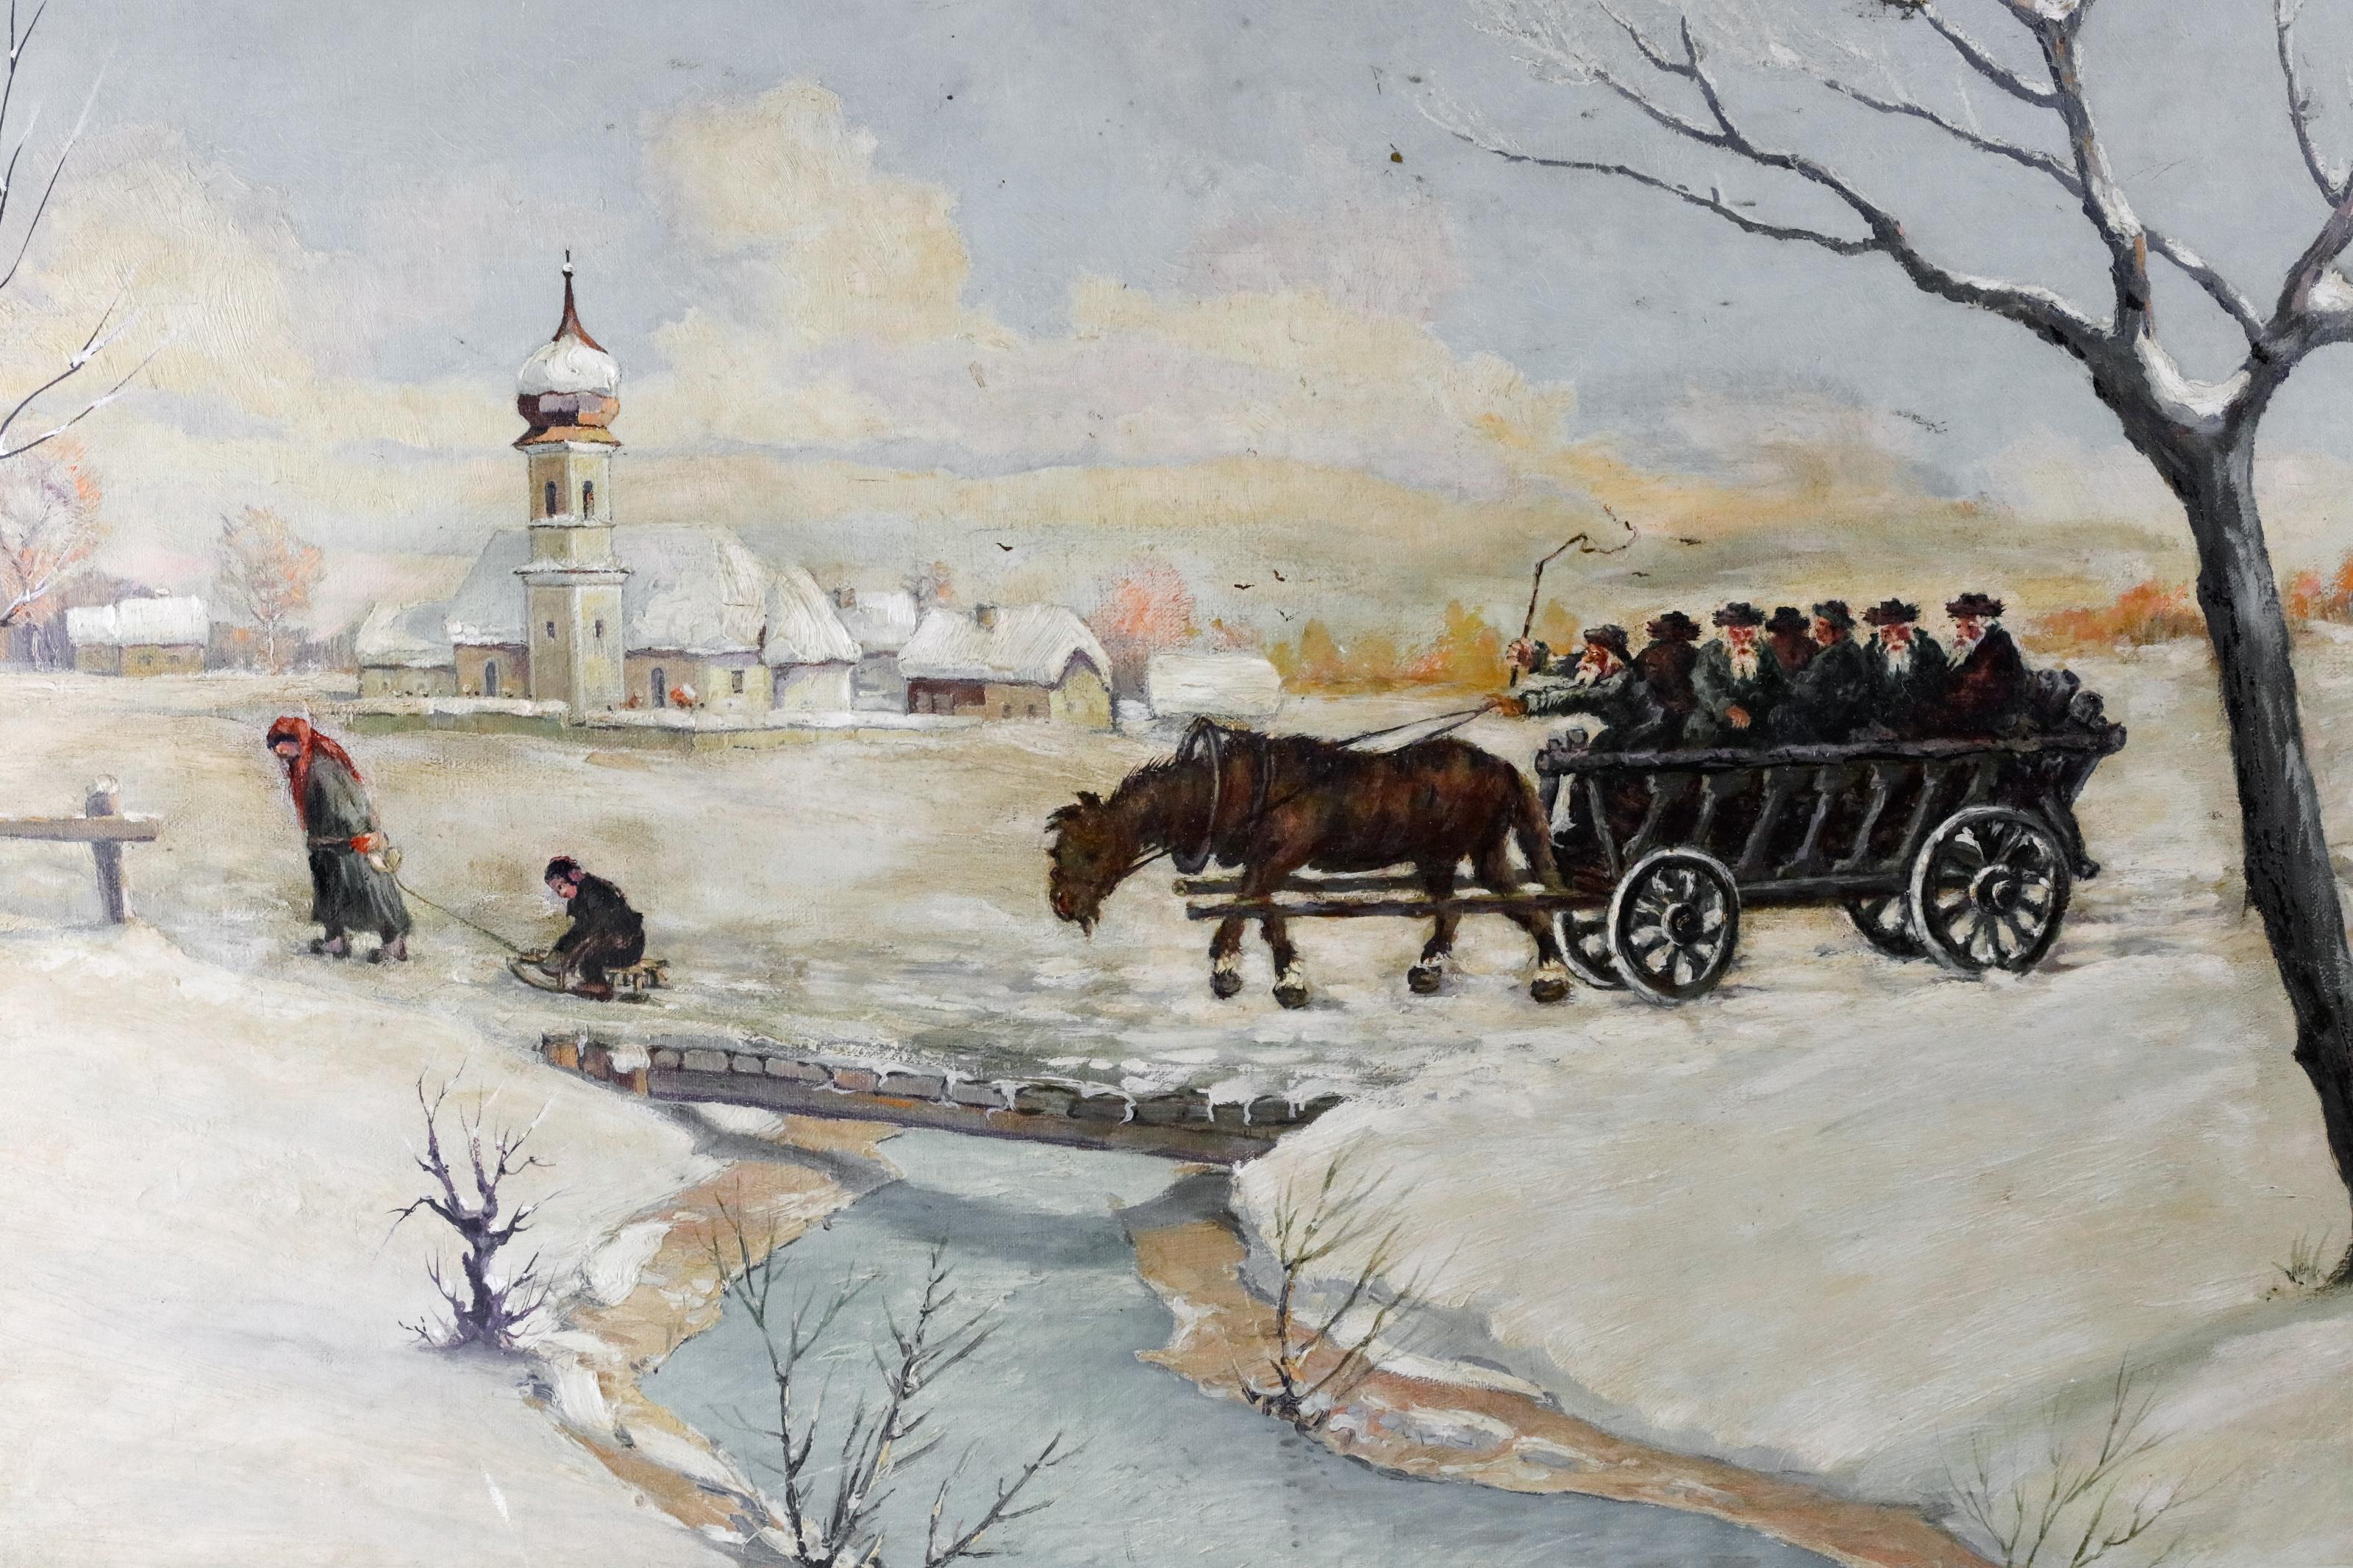 Chassidim in winter landscape.
Oil on canvas. Framed. Measures: 22.5 x 35 inches.
20th century.